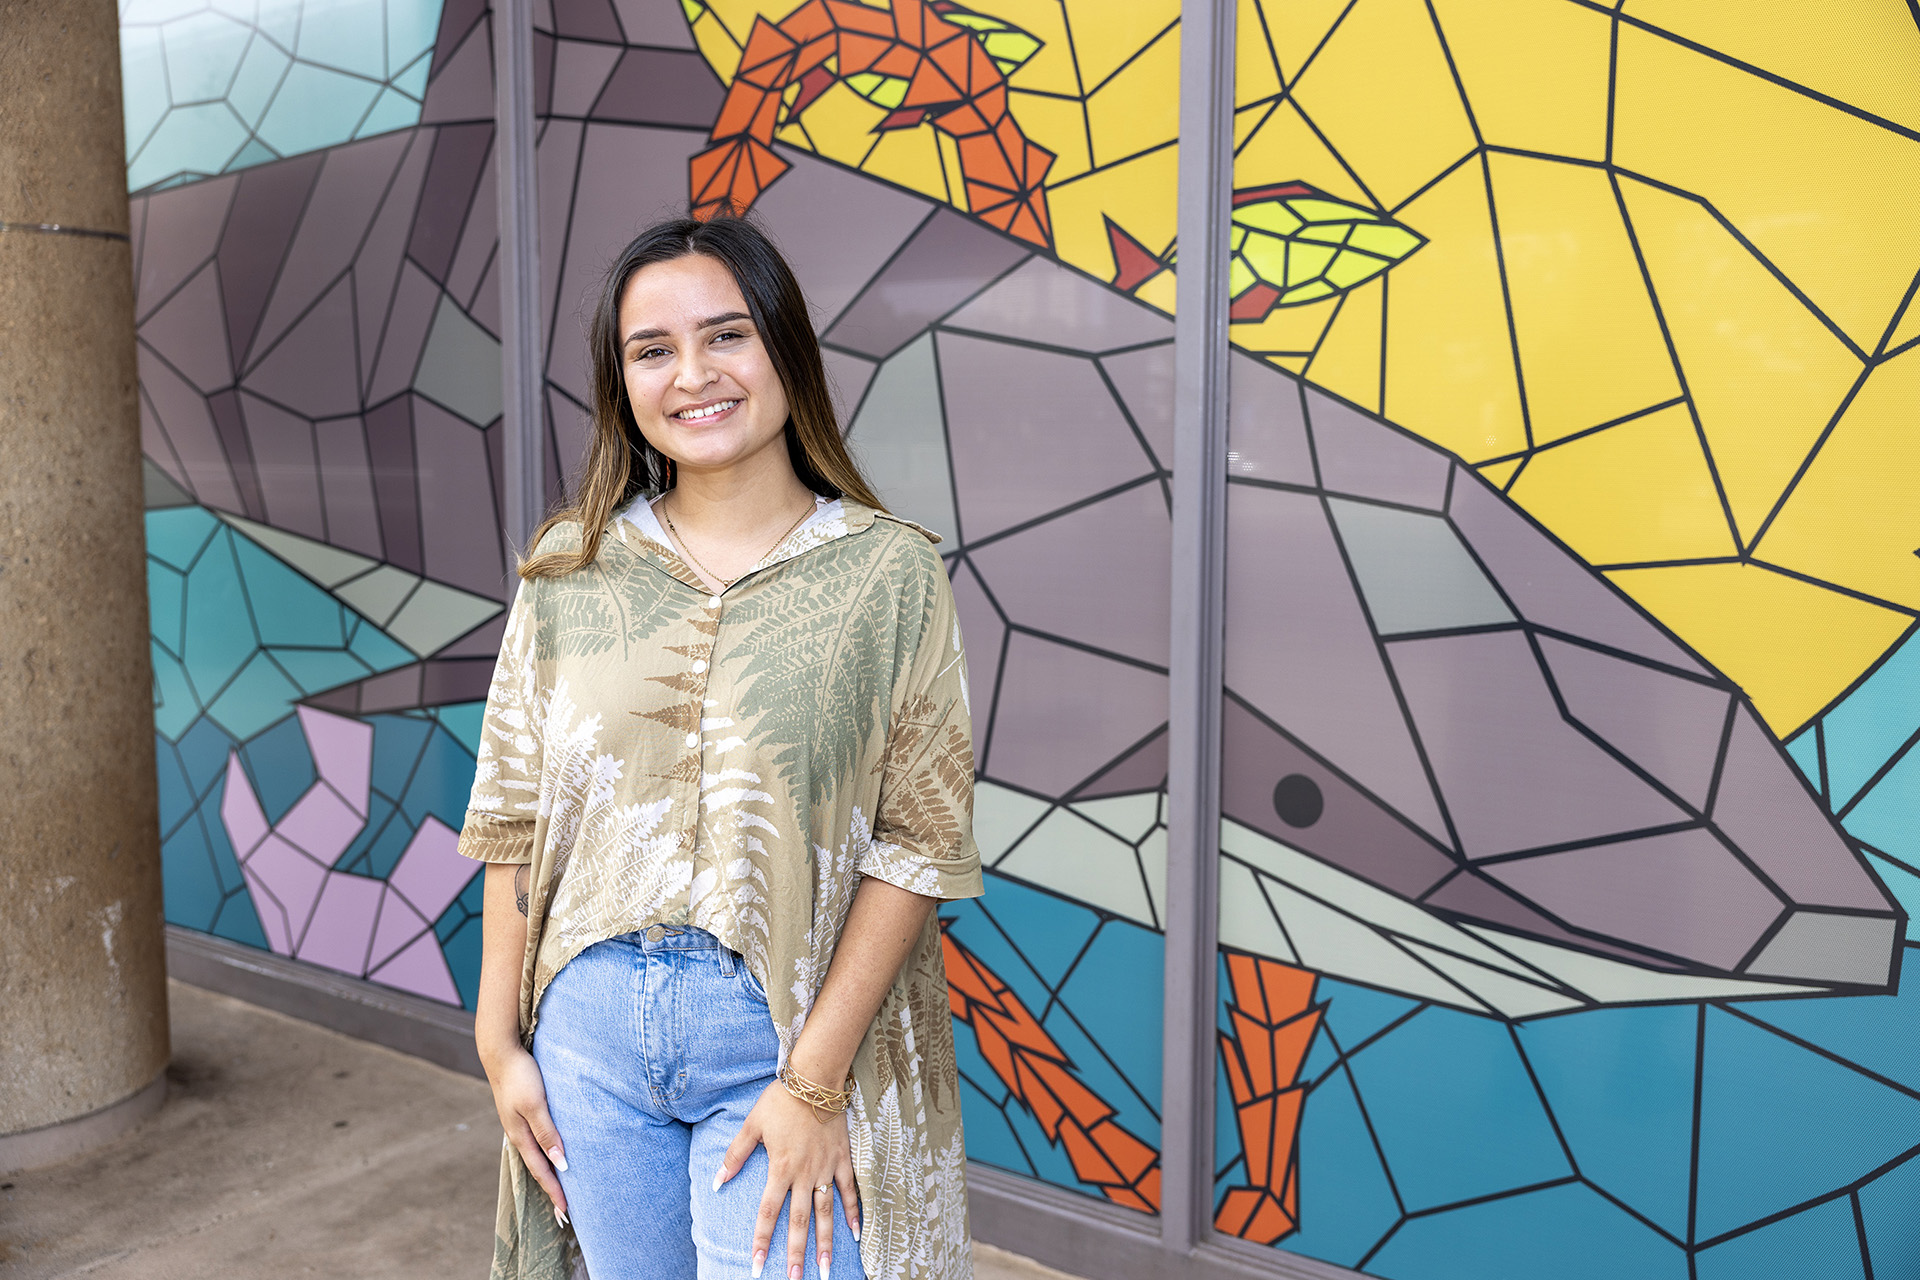 Taylor Wilson in front of her mural at Learning Commons, Nā Kiaʻi o Puʻuloa (The Protectors of Puʻuloa)